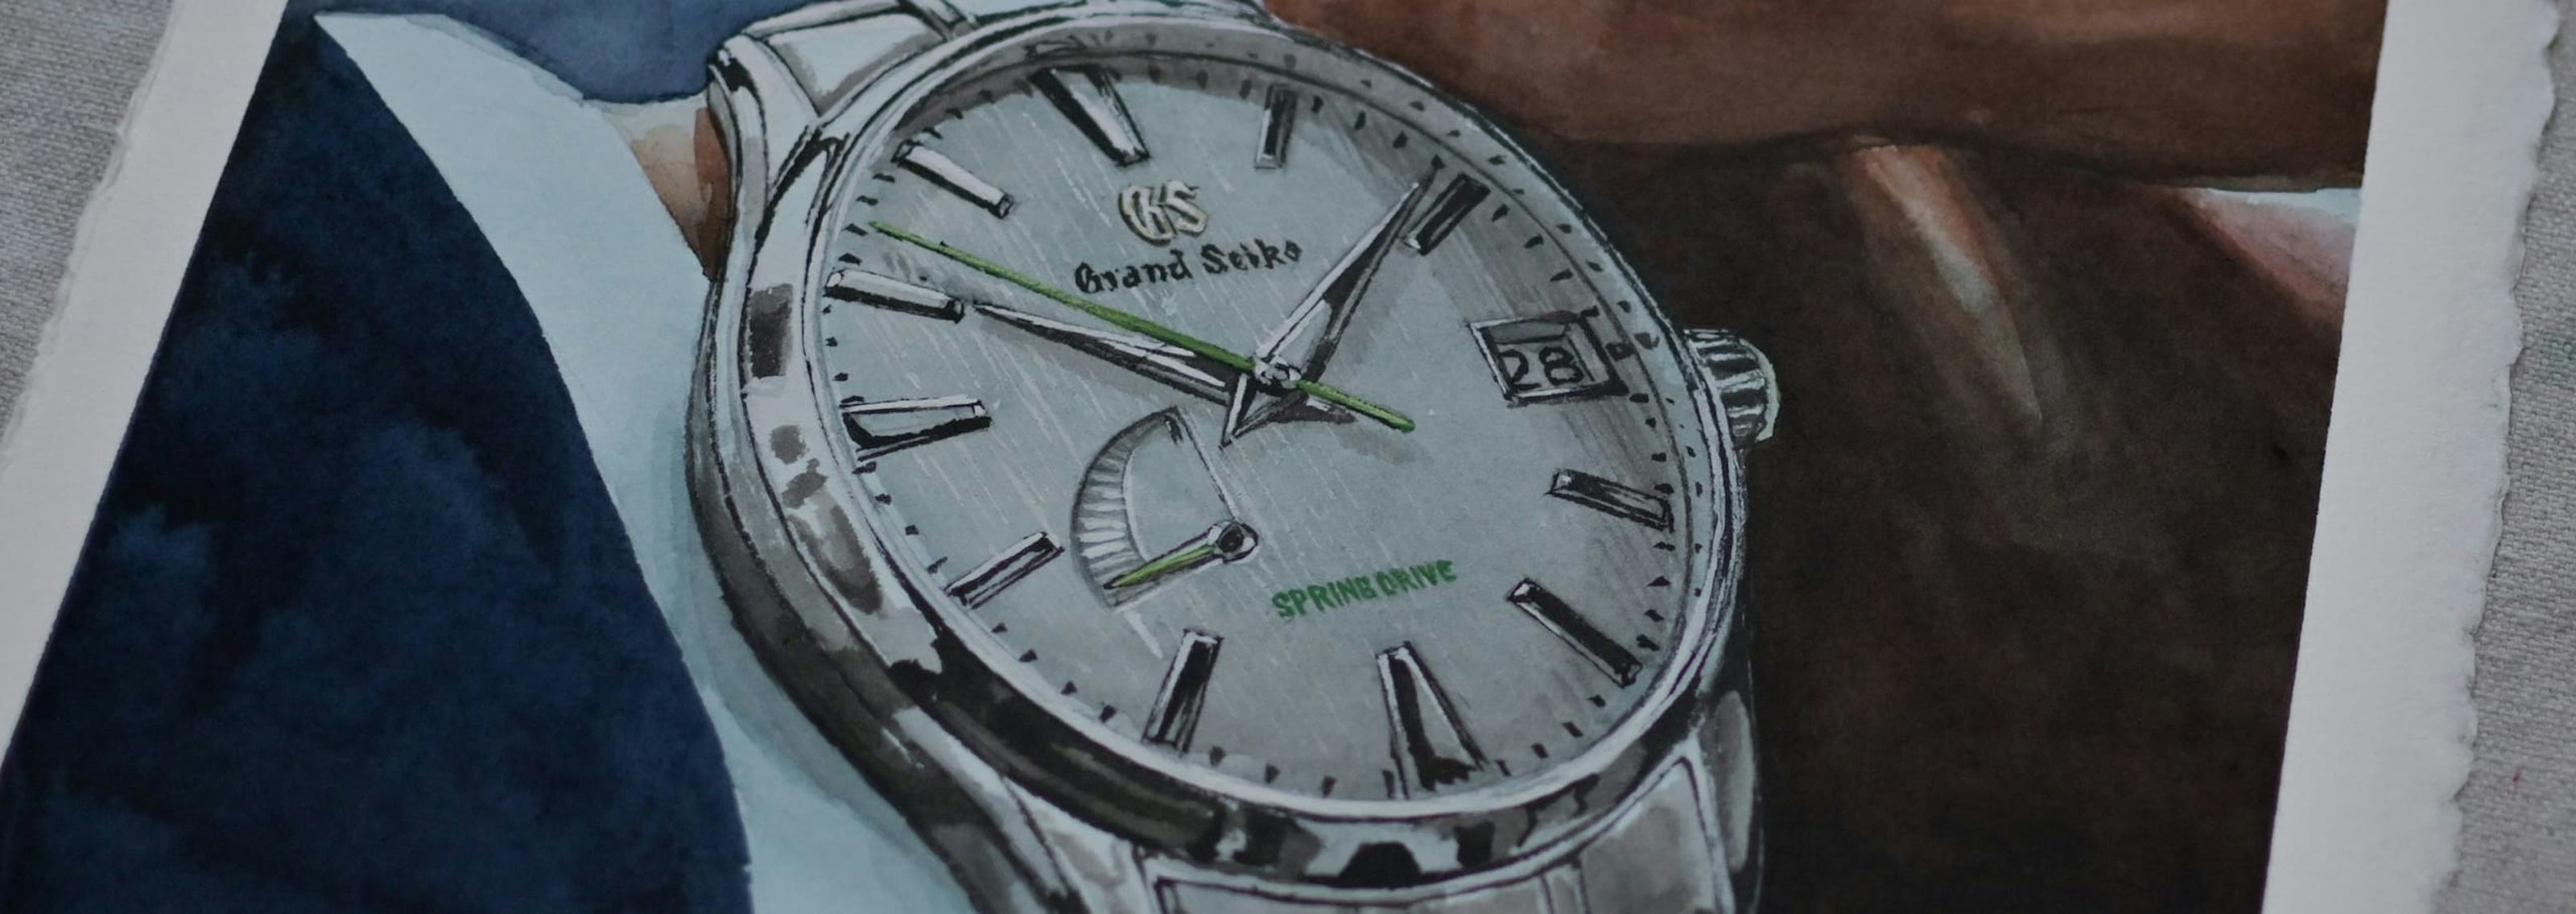 Behind the Scenes with Grand Seiko's Dials | WatchBox